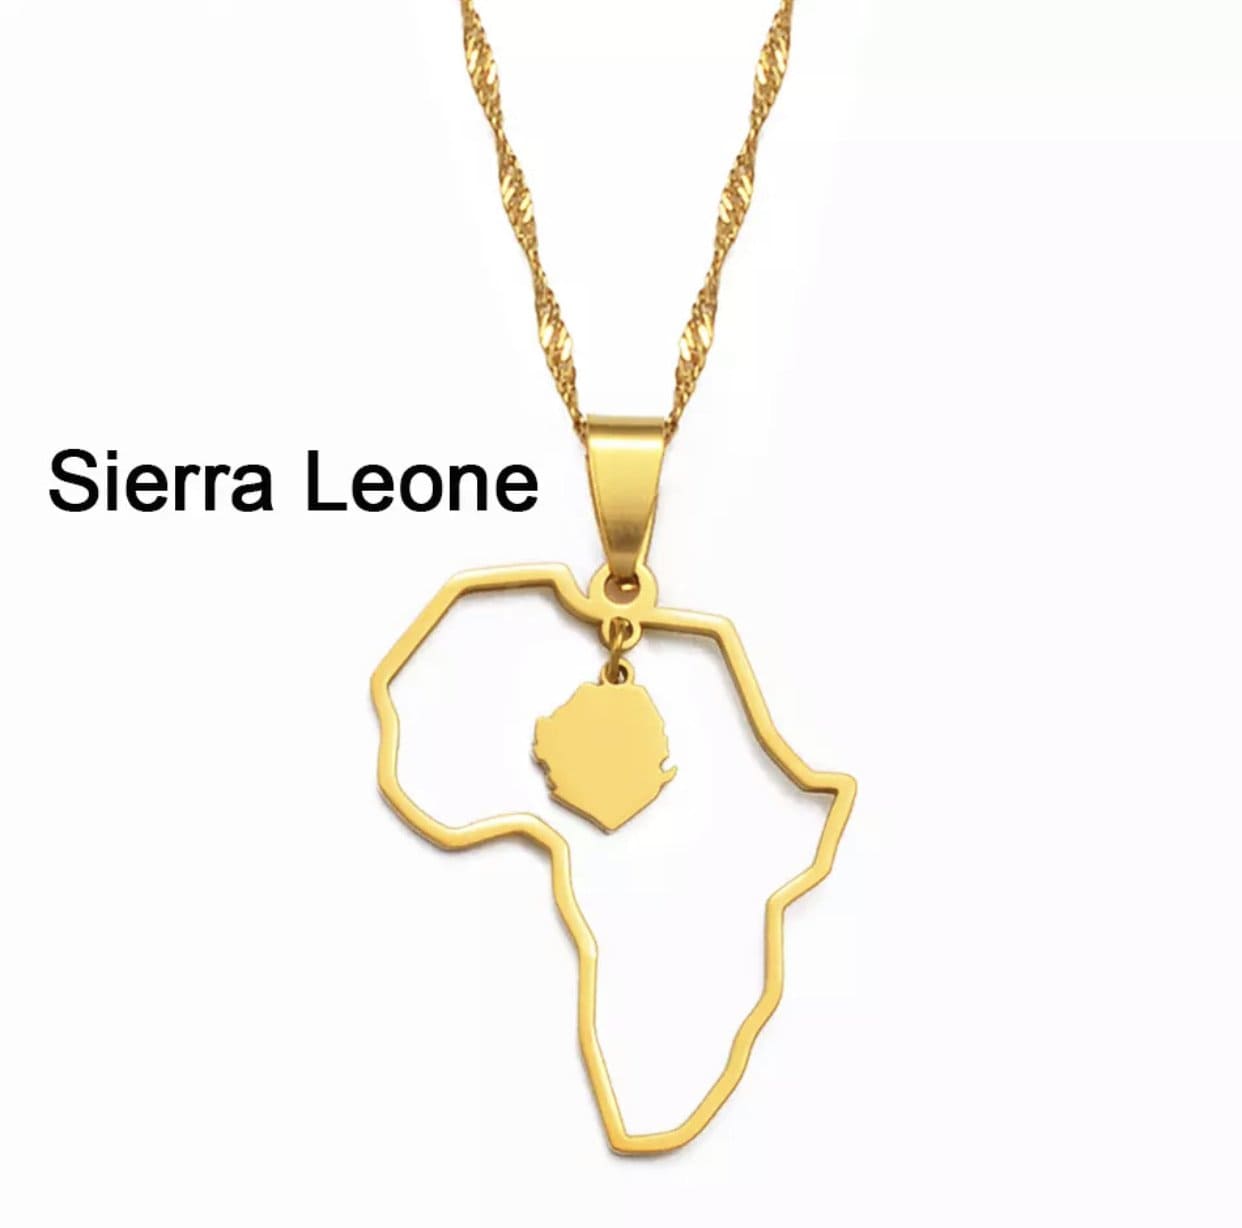 Veryldesigns Necklace Sierra Leone Custom African country Necklace